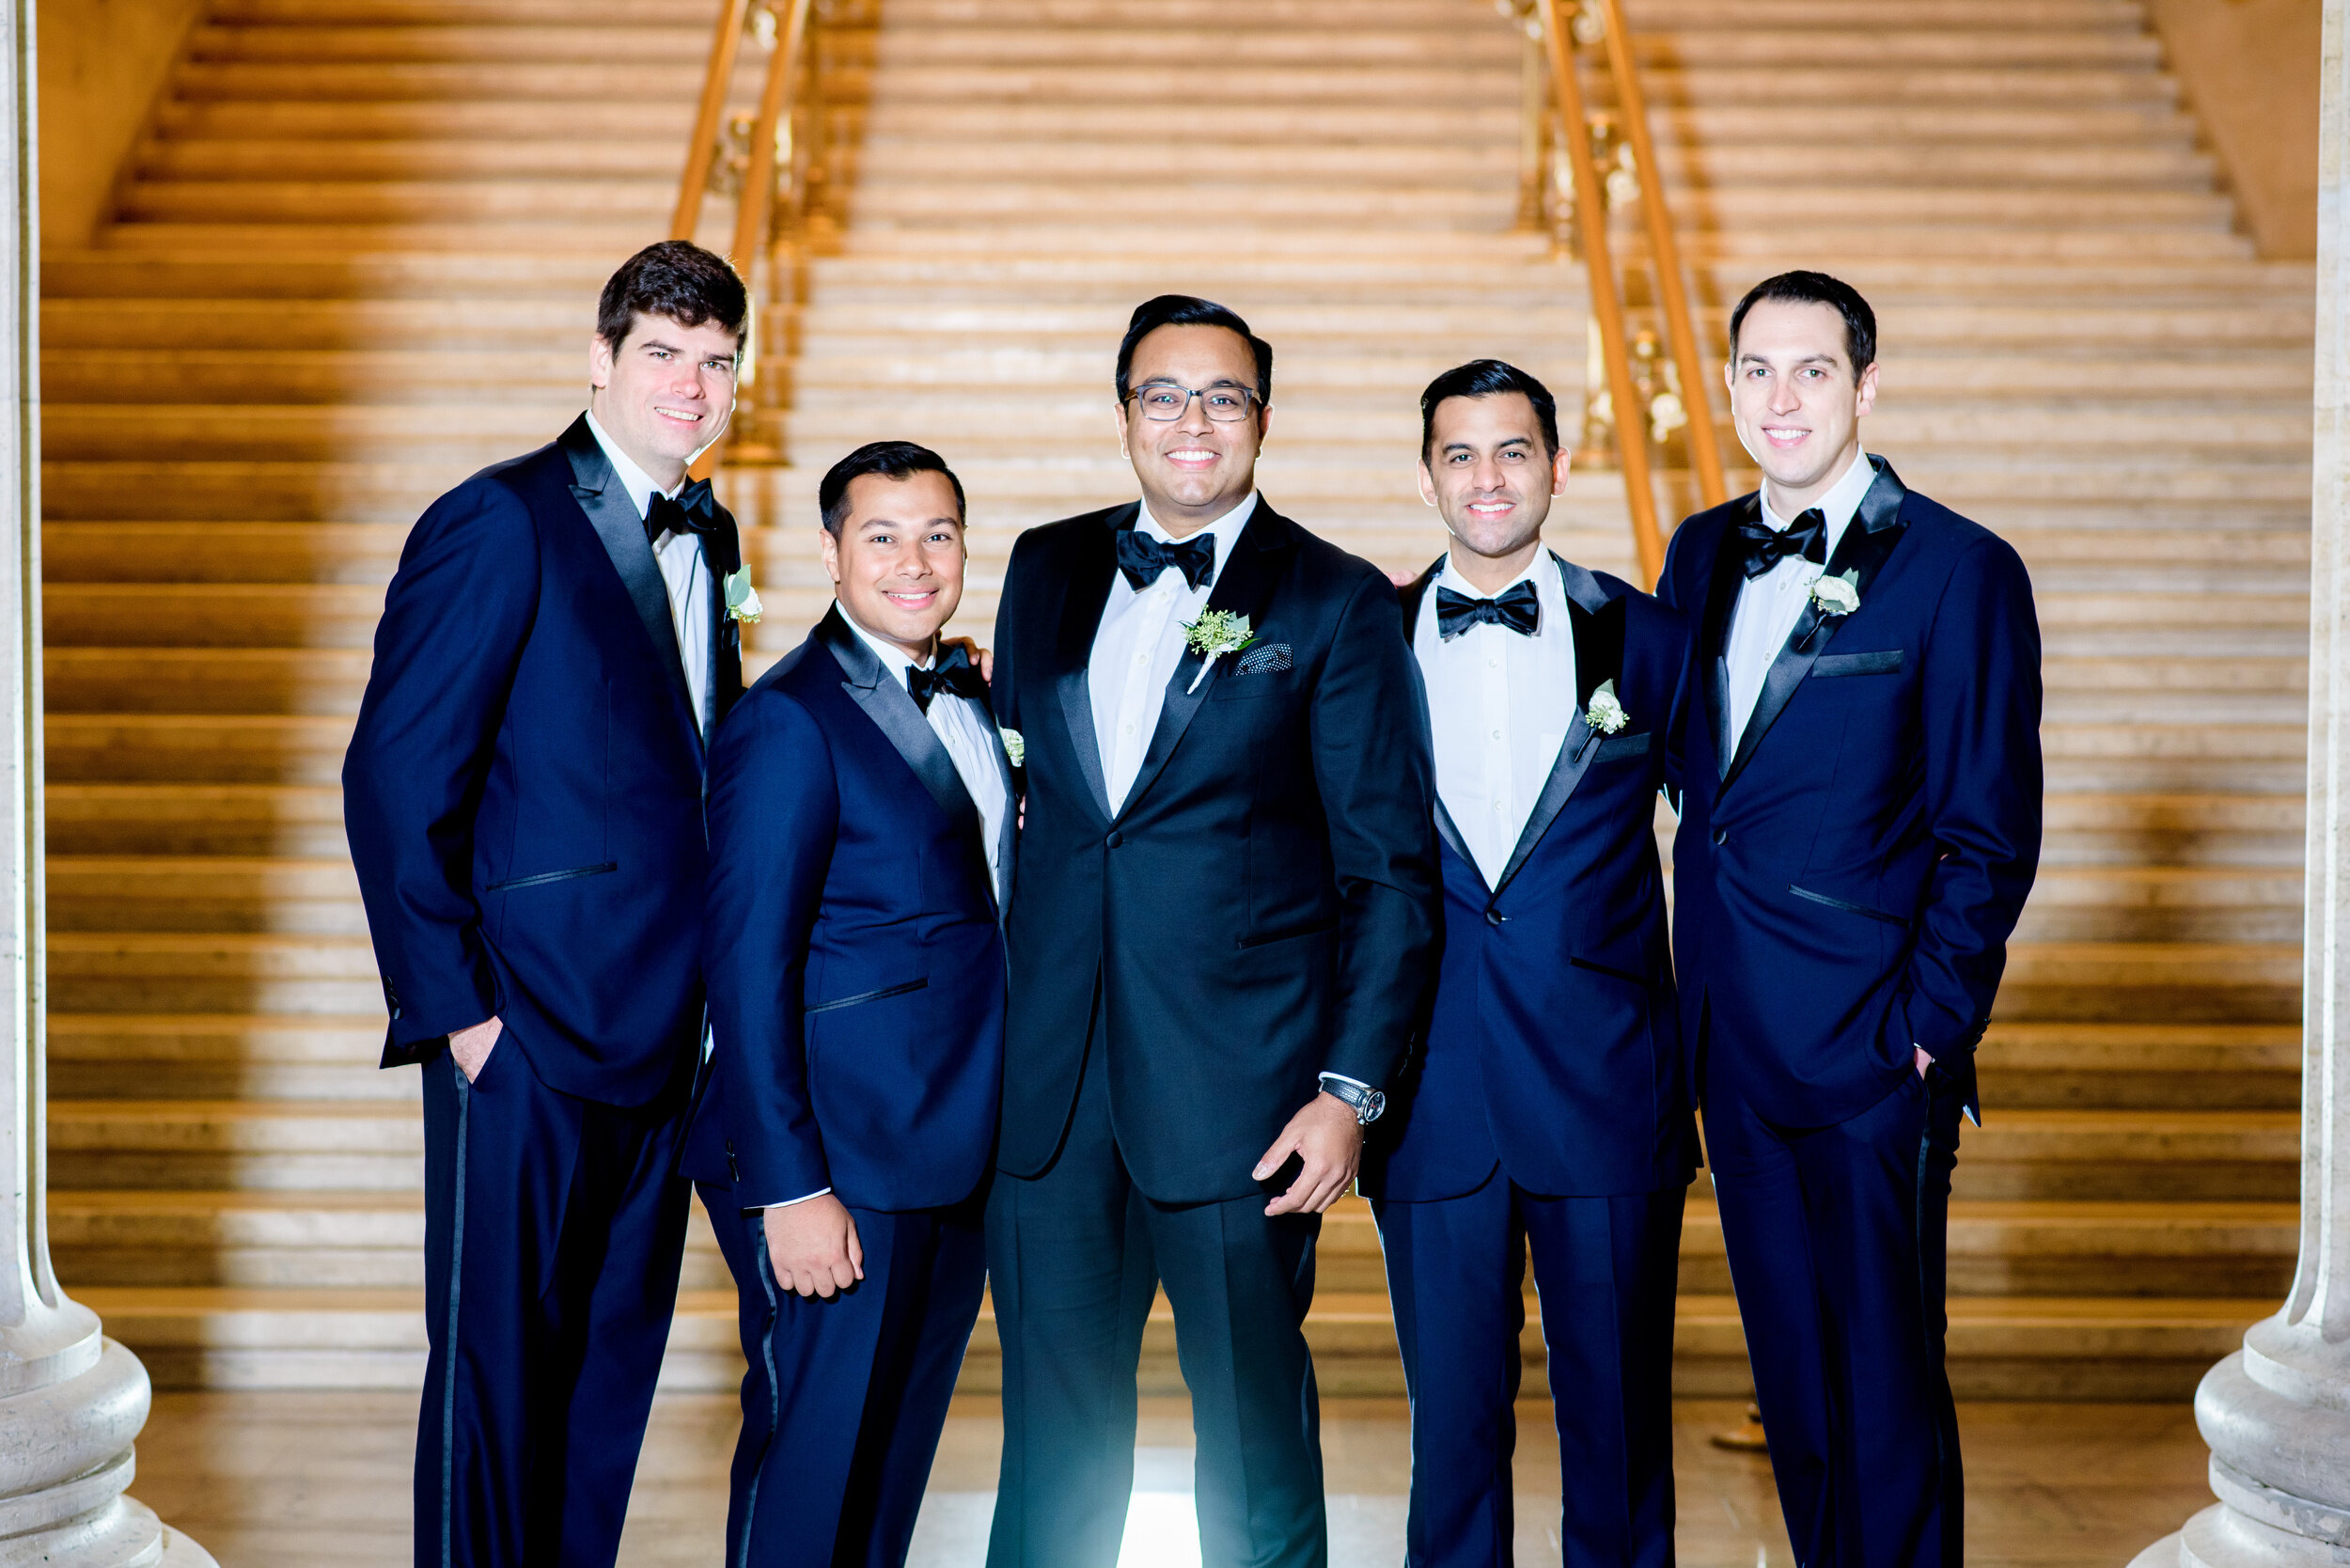 Groom and groomsmen at Union Station Chicago: Geraghty Chicago wedding photography captured by J. Brown Photography.